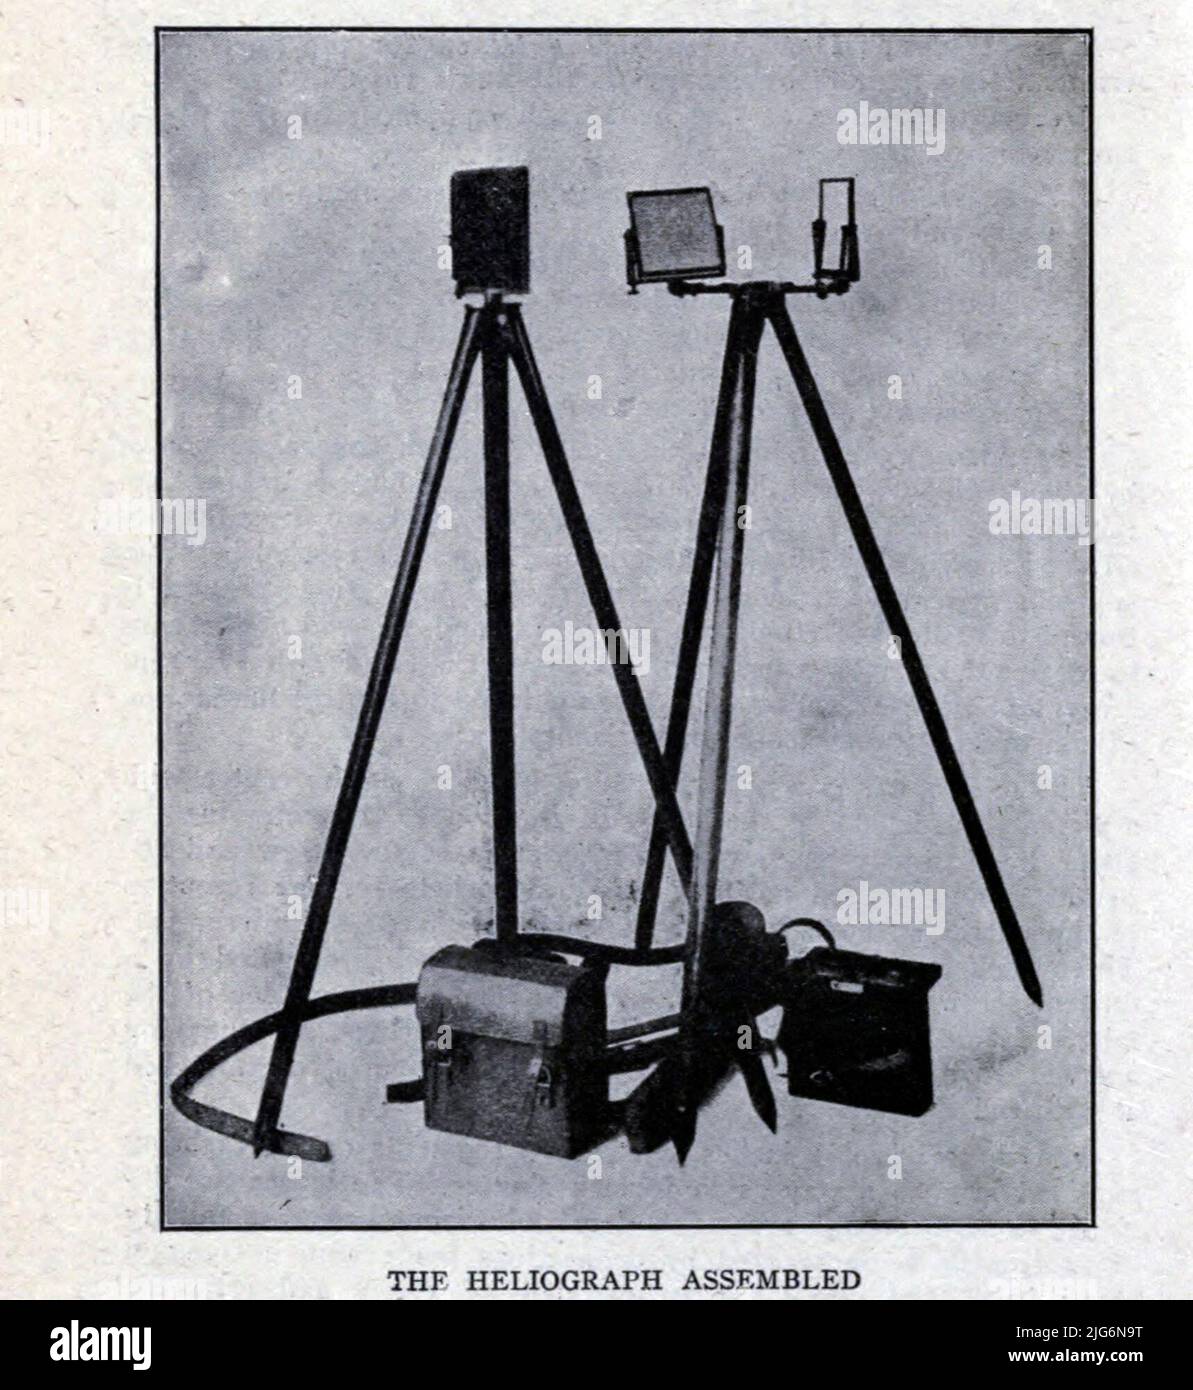 THE HELIOGRAPH ASSEMBLATED from the ' Military Signal Corps manual ' by James Andrew White, Erscheinungsdatum 1918 Herausgeber: New York : Wireless Press, inc Stockfoto